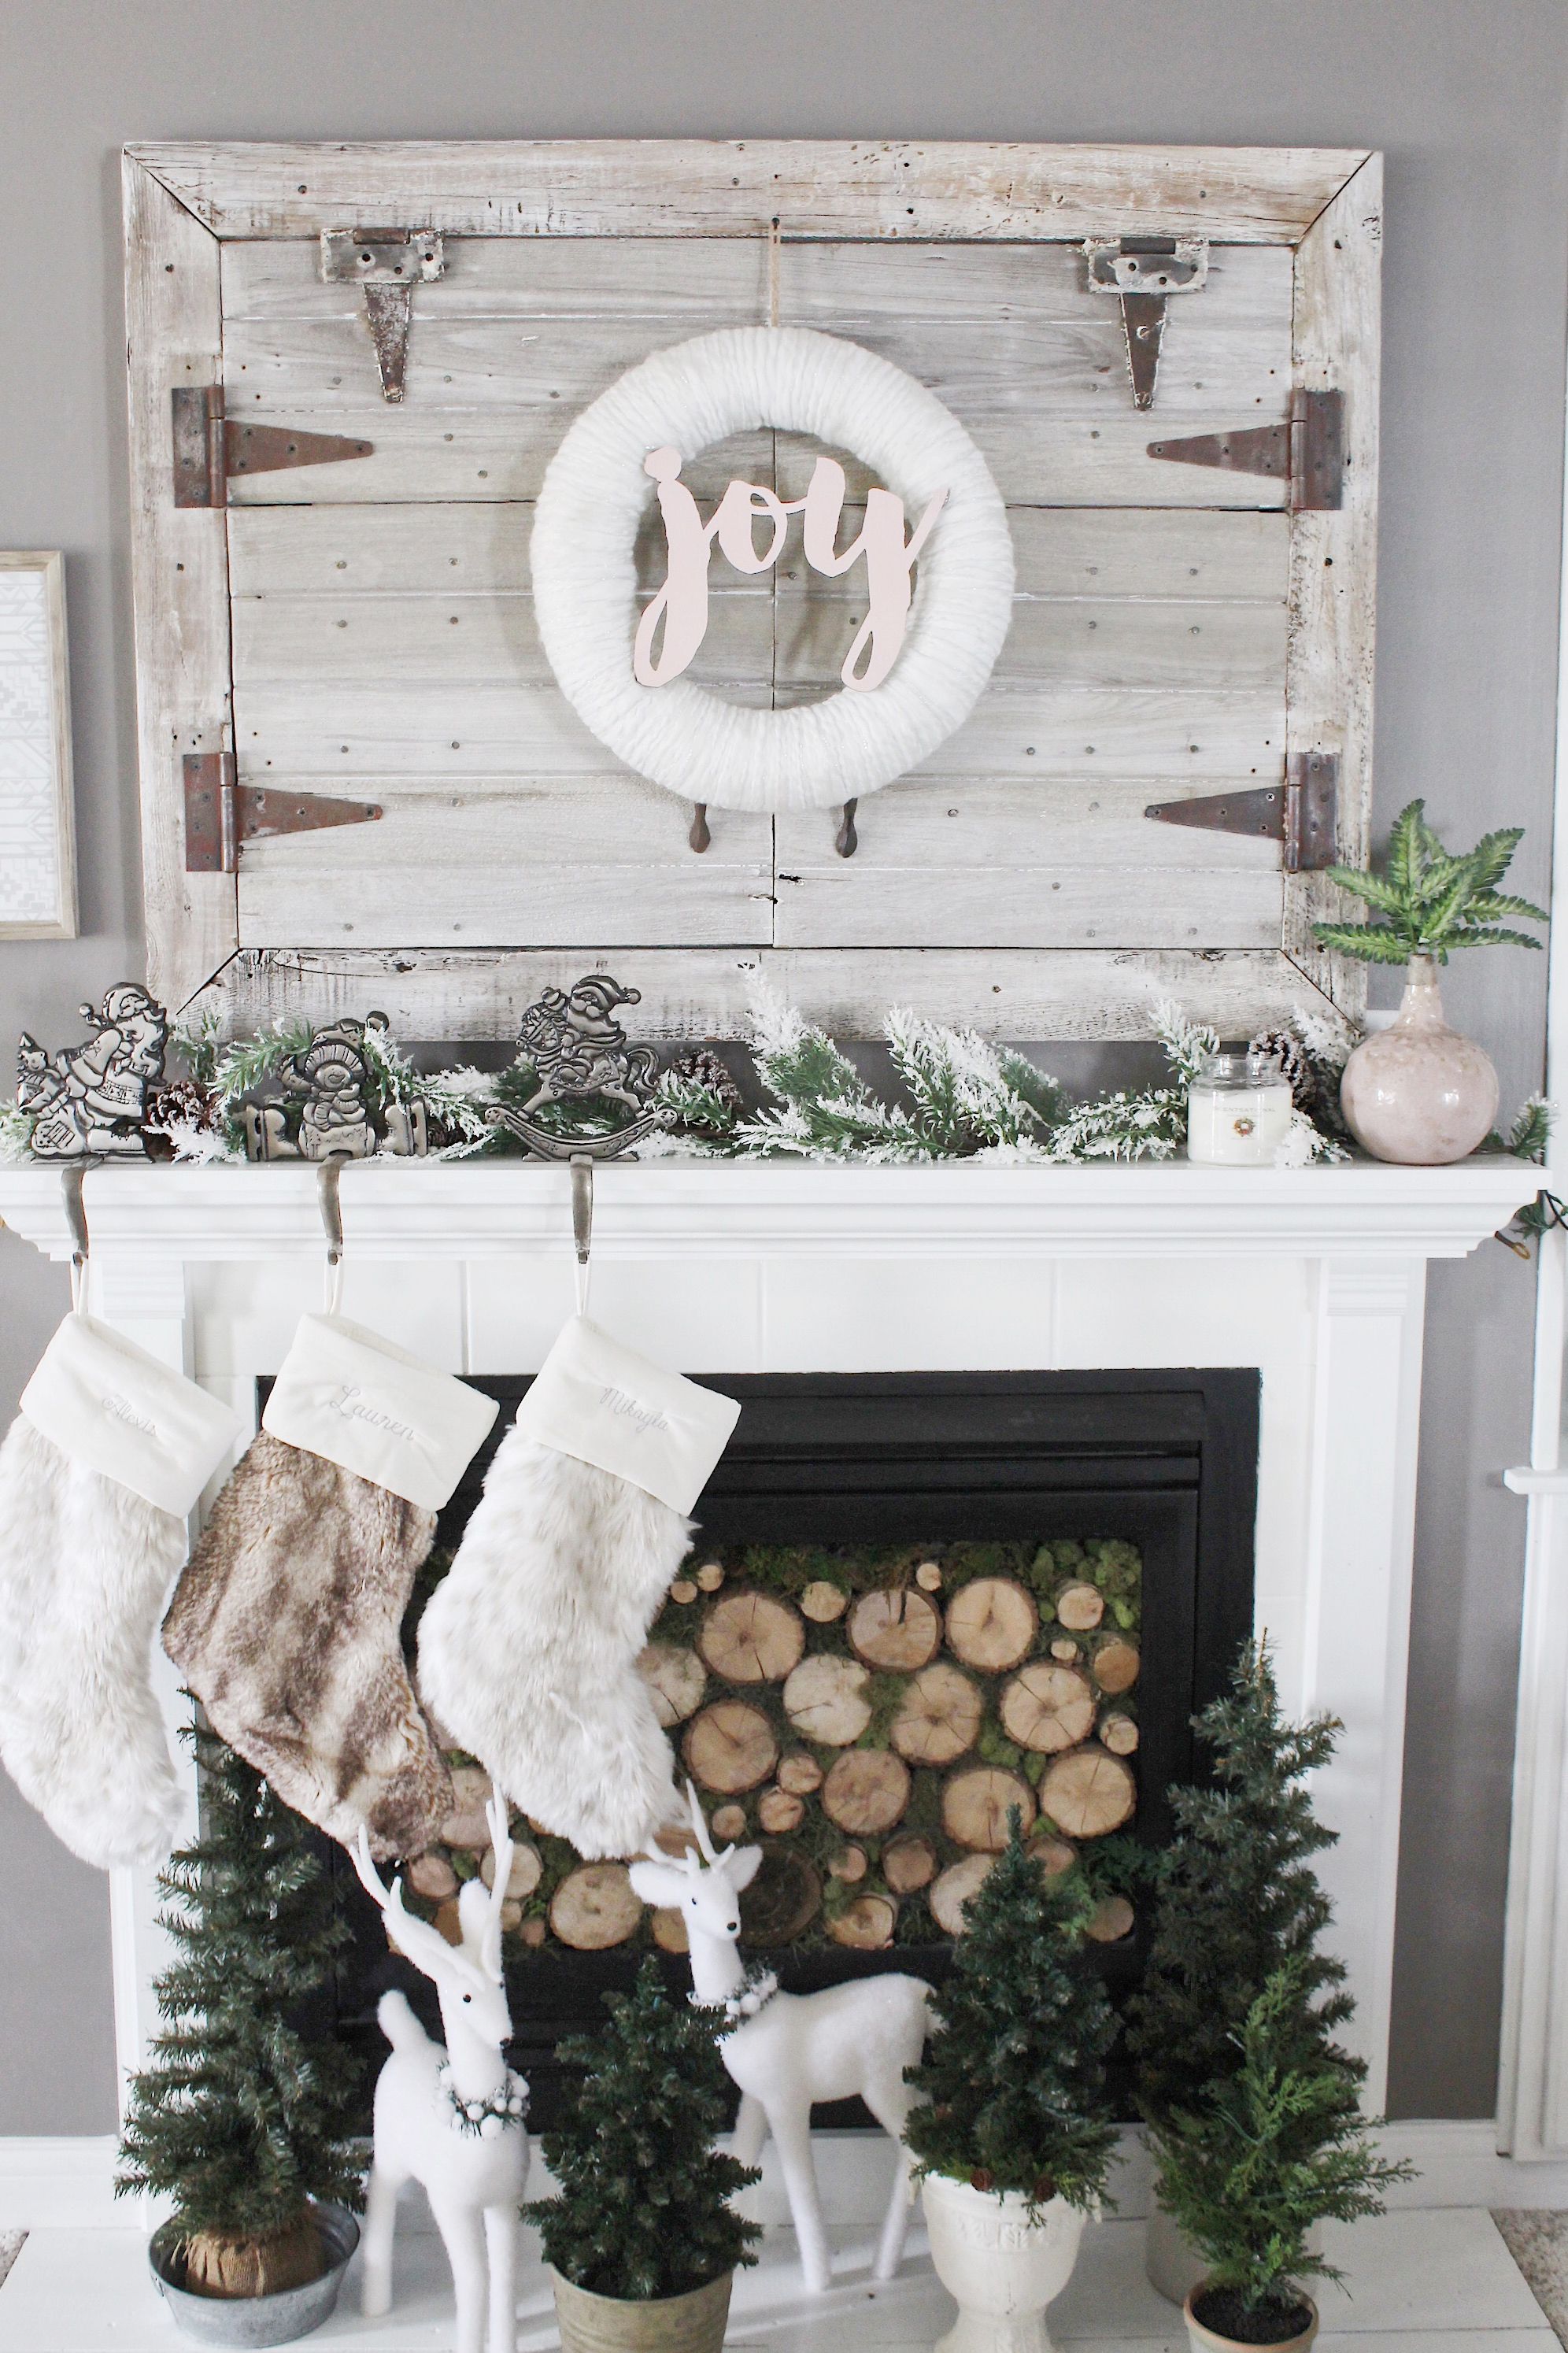 54 Christmas Mantel Decorations - Ideas for Holiday Fireplace ...